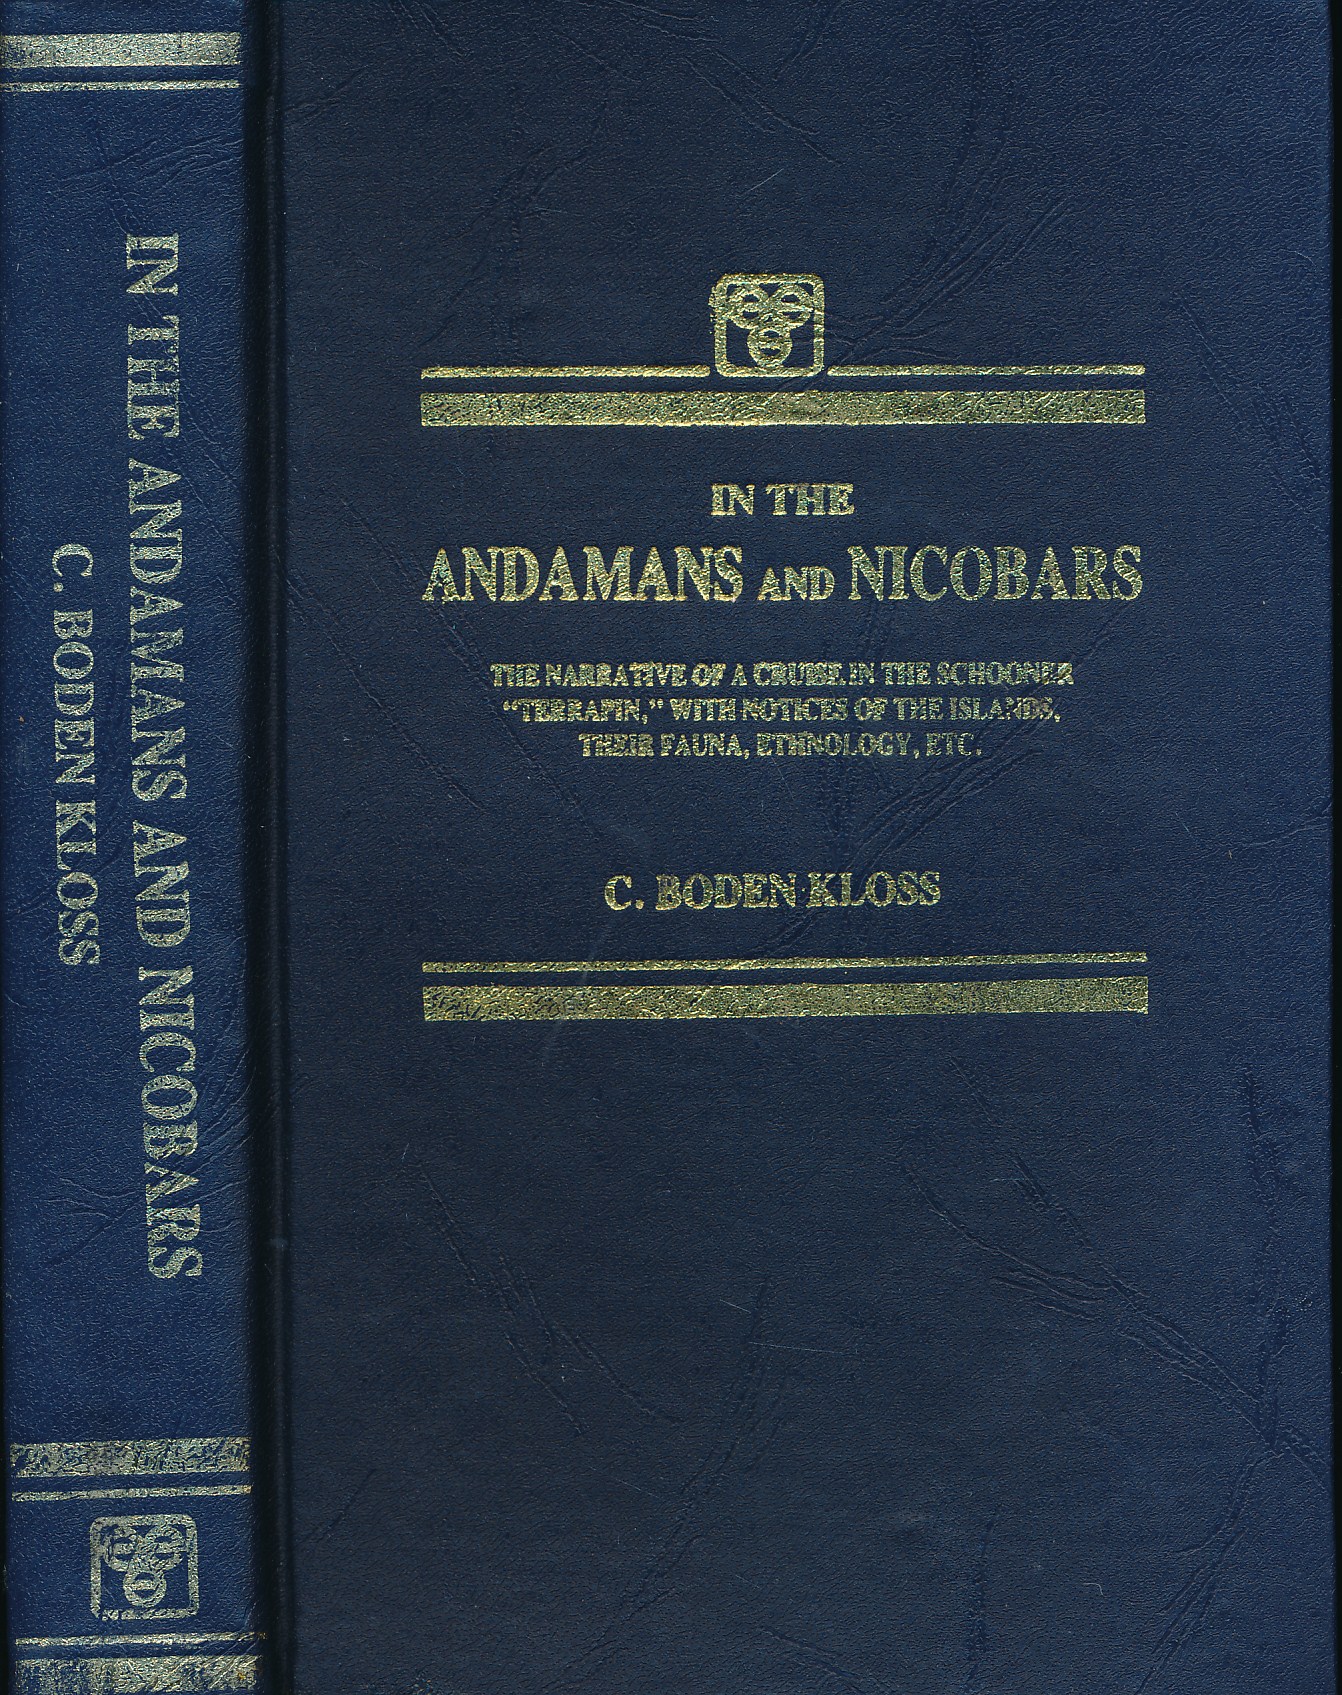 The Andamans and Nicobars. The Narrative of a Cruise in the Schooner 'Terrapin', with Notices of the Islands, Their Fauna, Ethnology., Etc